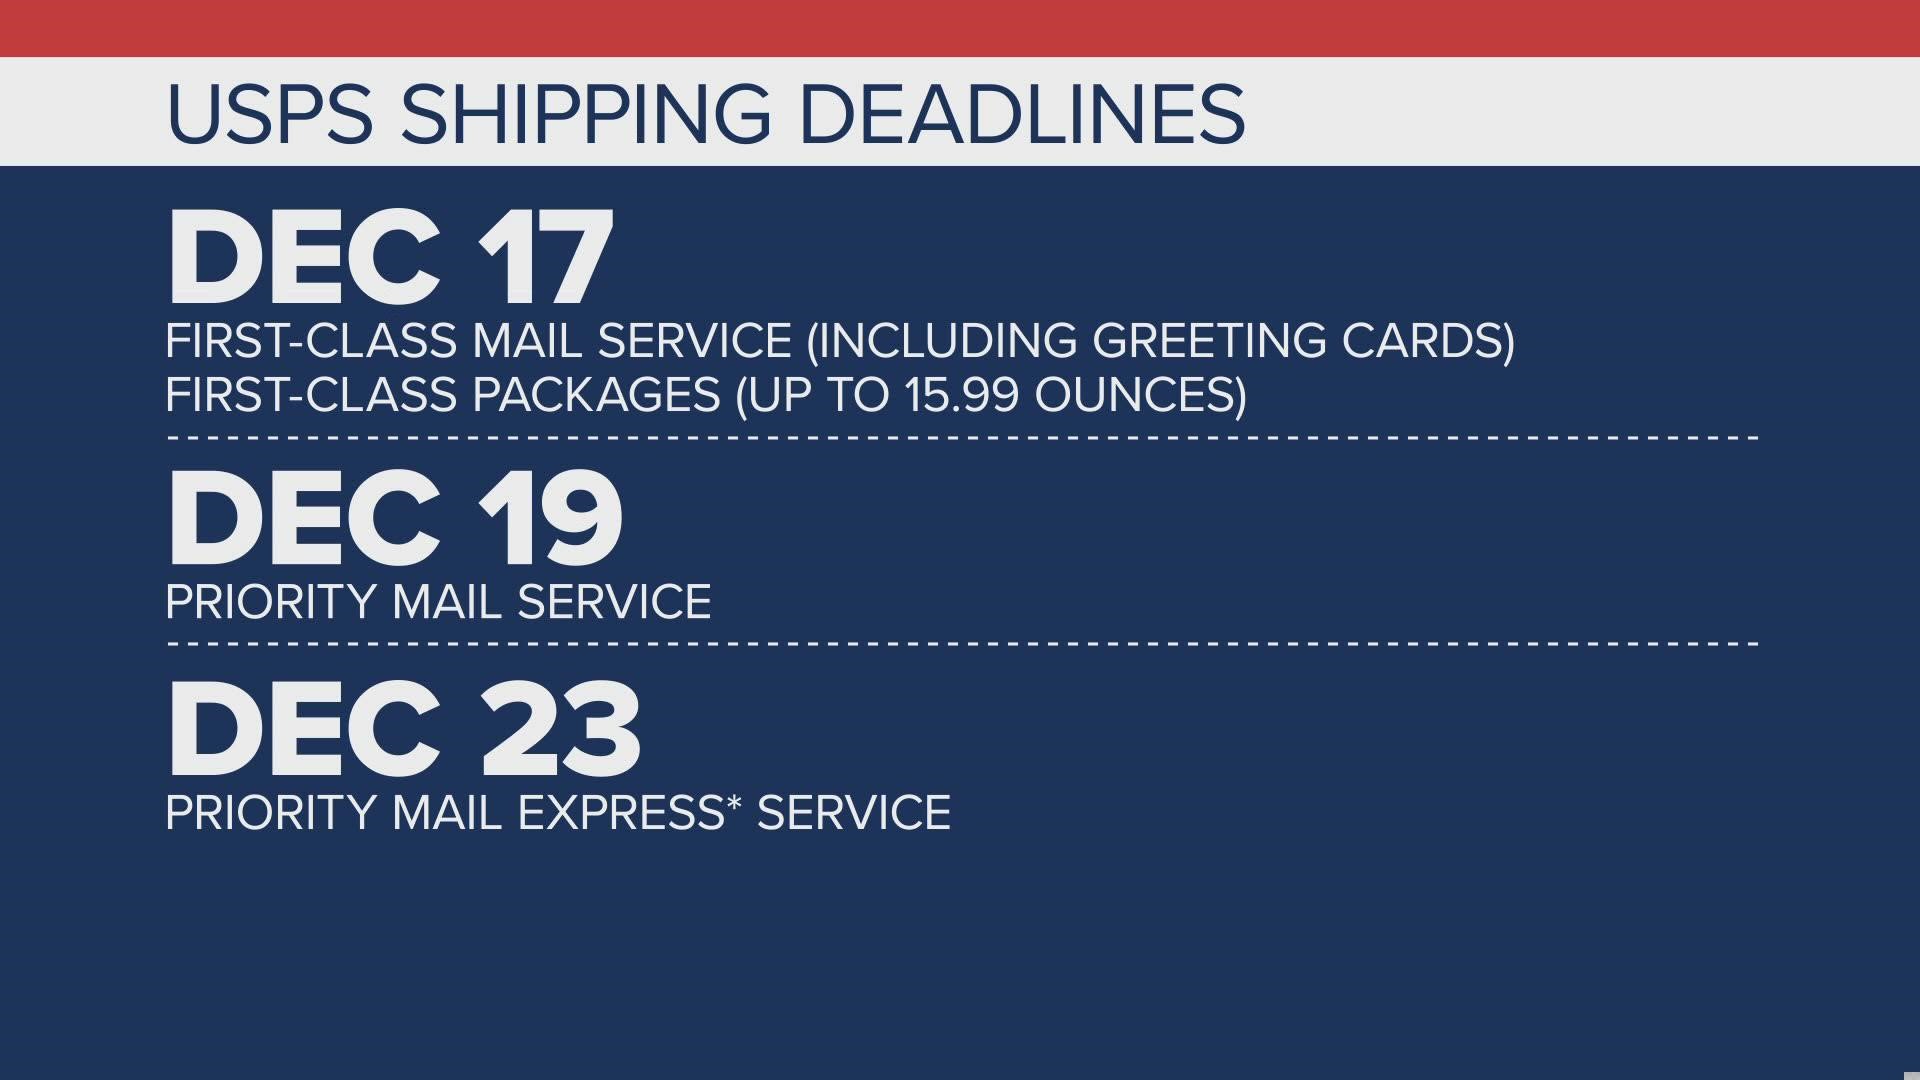 Get your holiday packages shipped early.